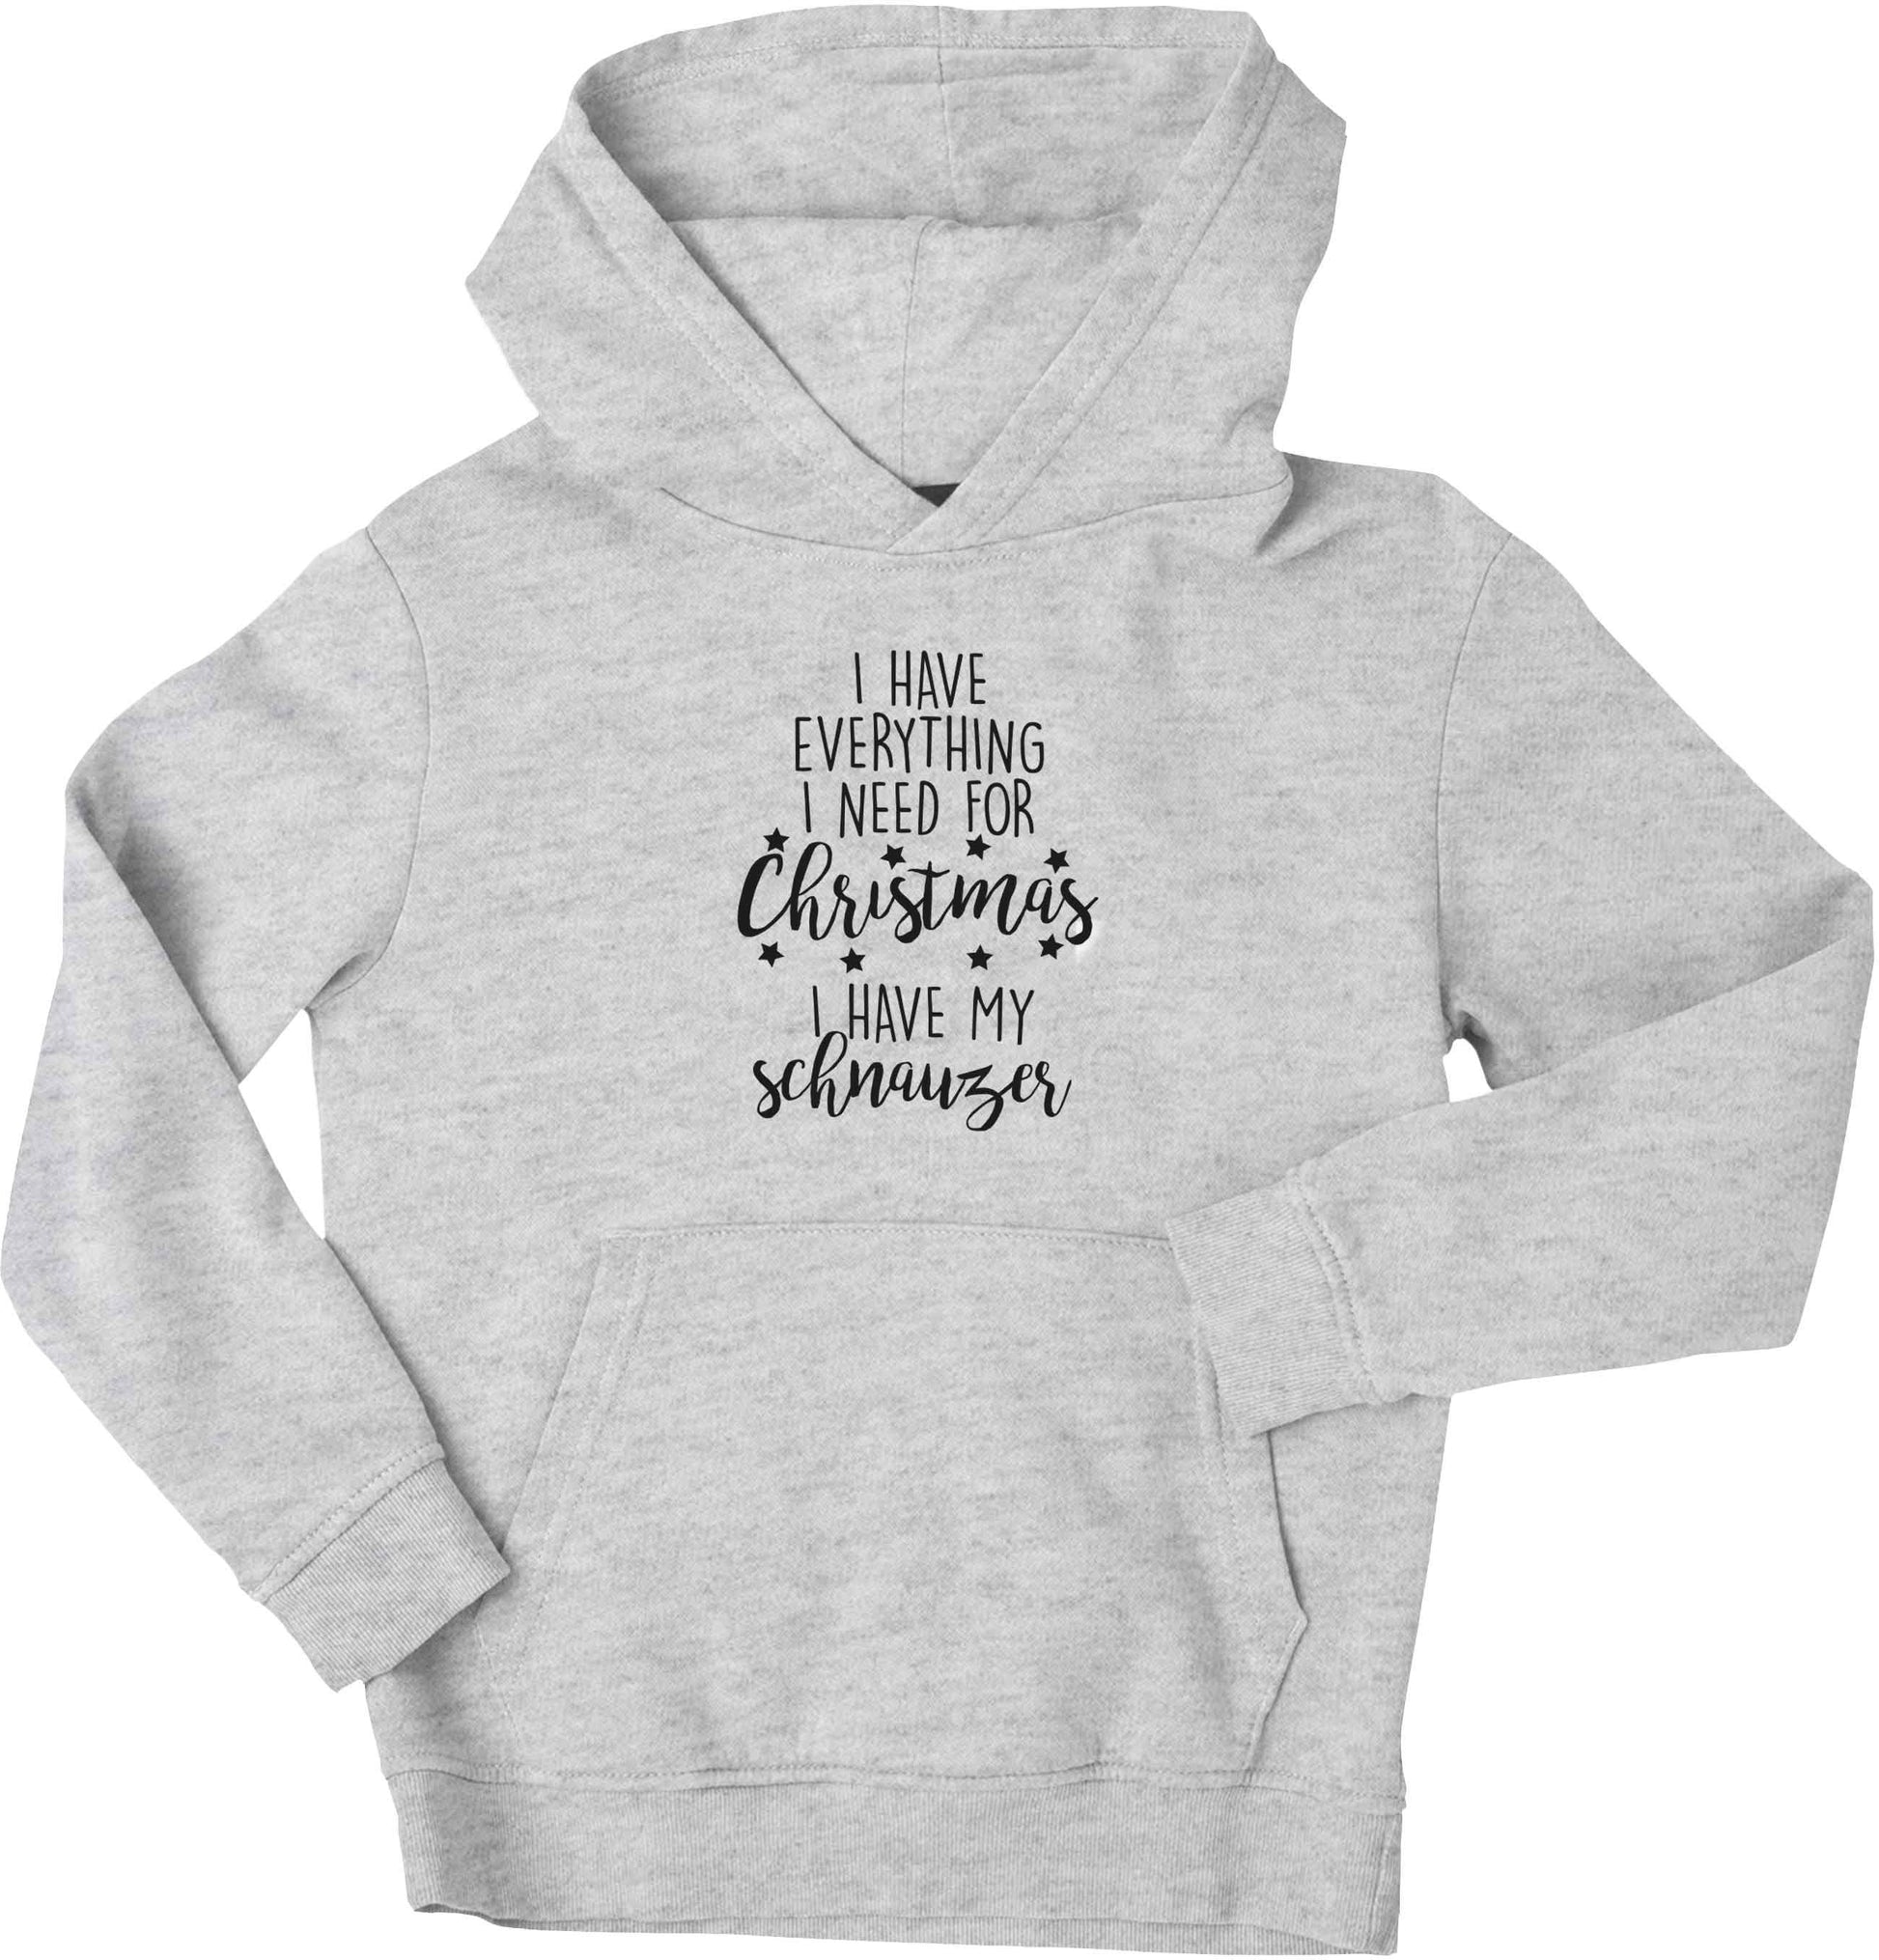 I have everything I need for Christmas I have my schnauzer children's grey hoodie 12-13 Years